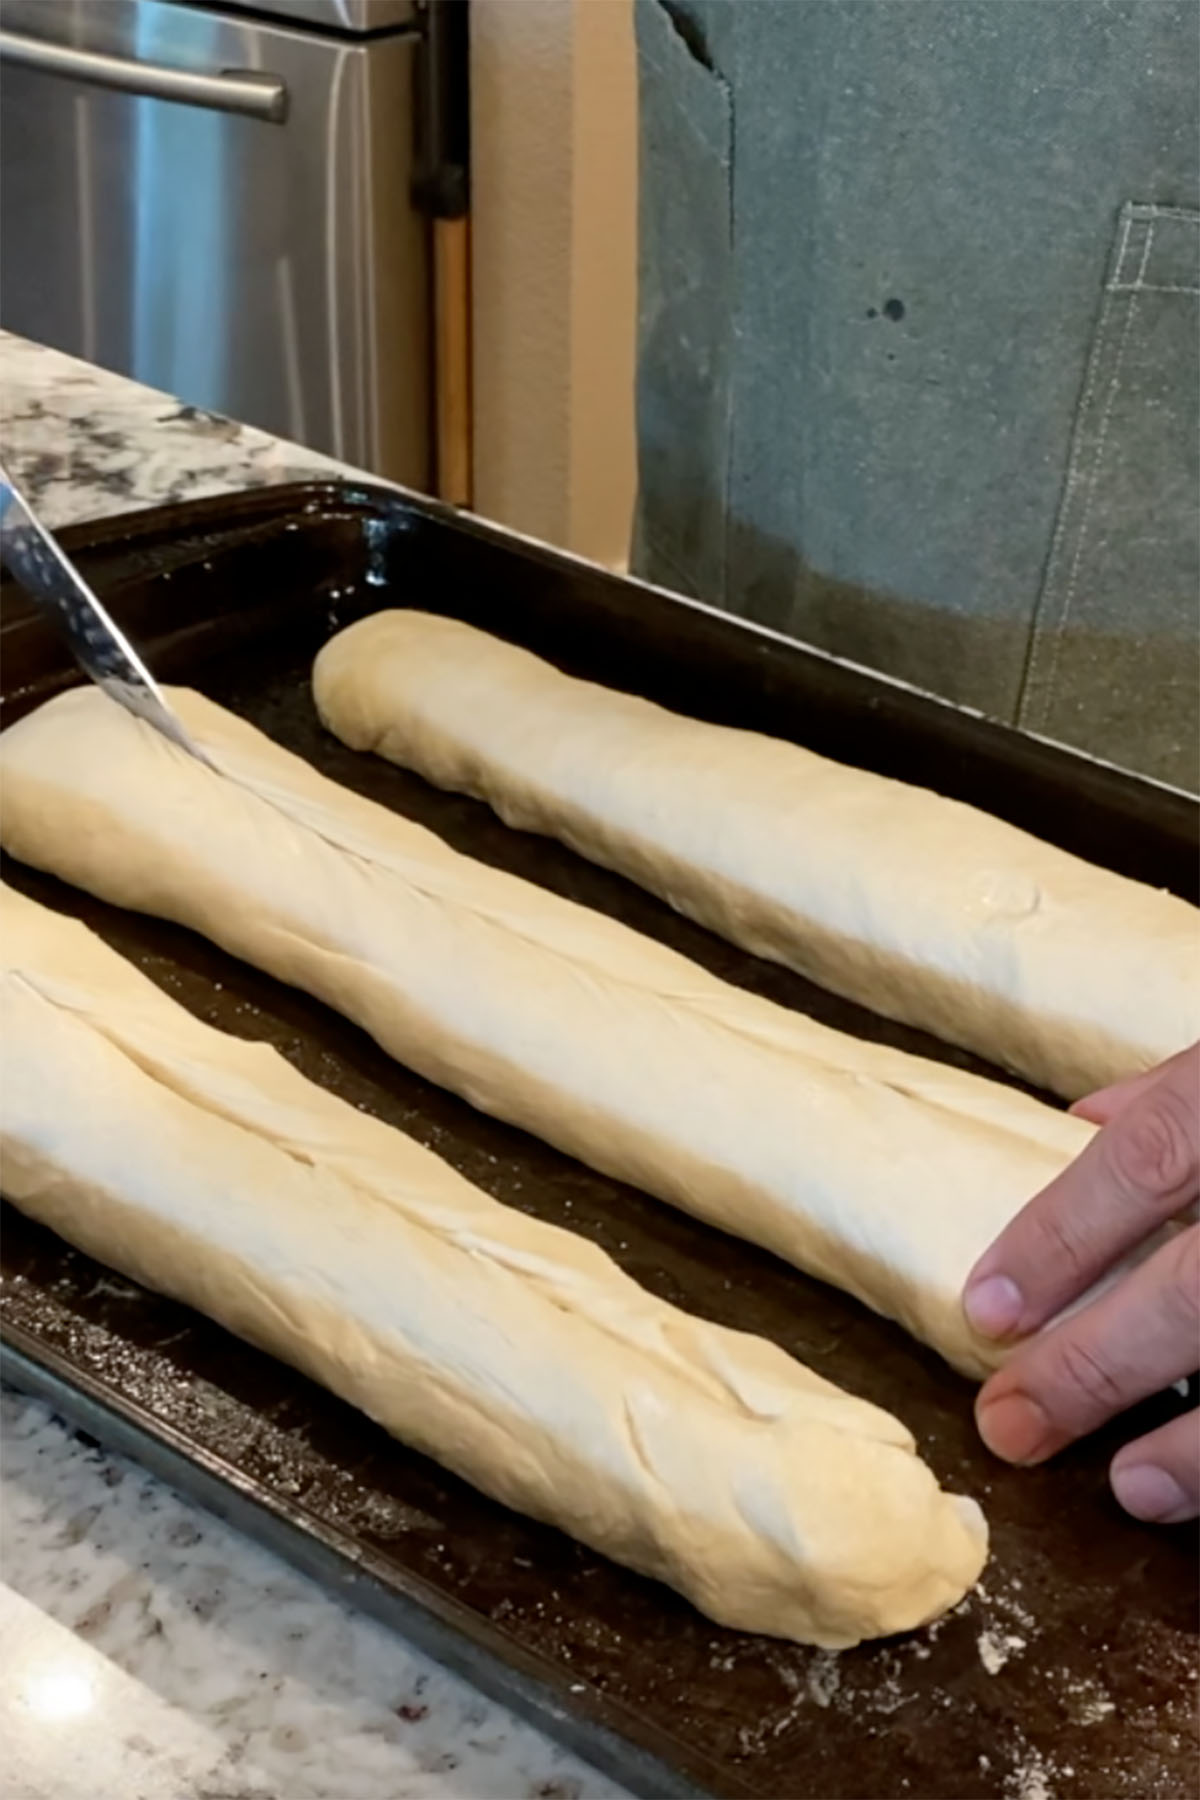 Three loaves of Cuban bread on a baking sheet being scored with a knife.